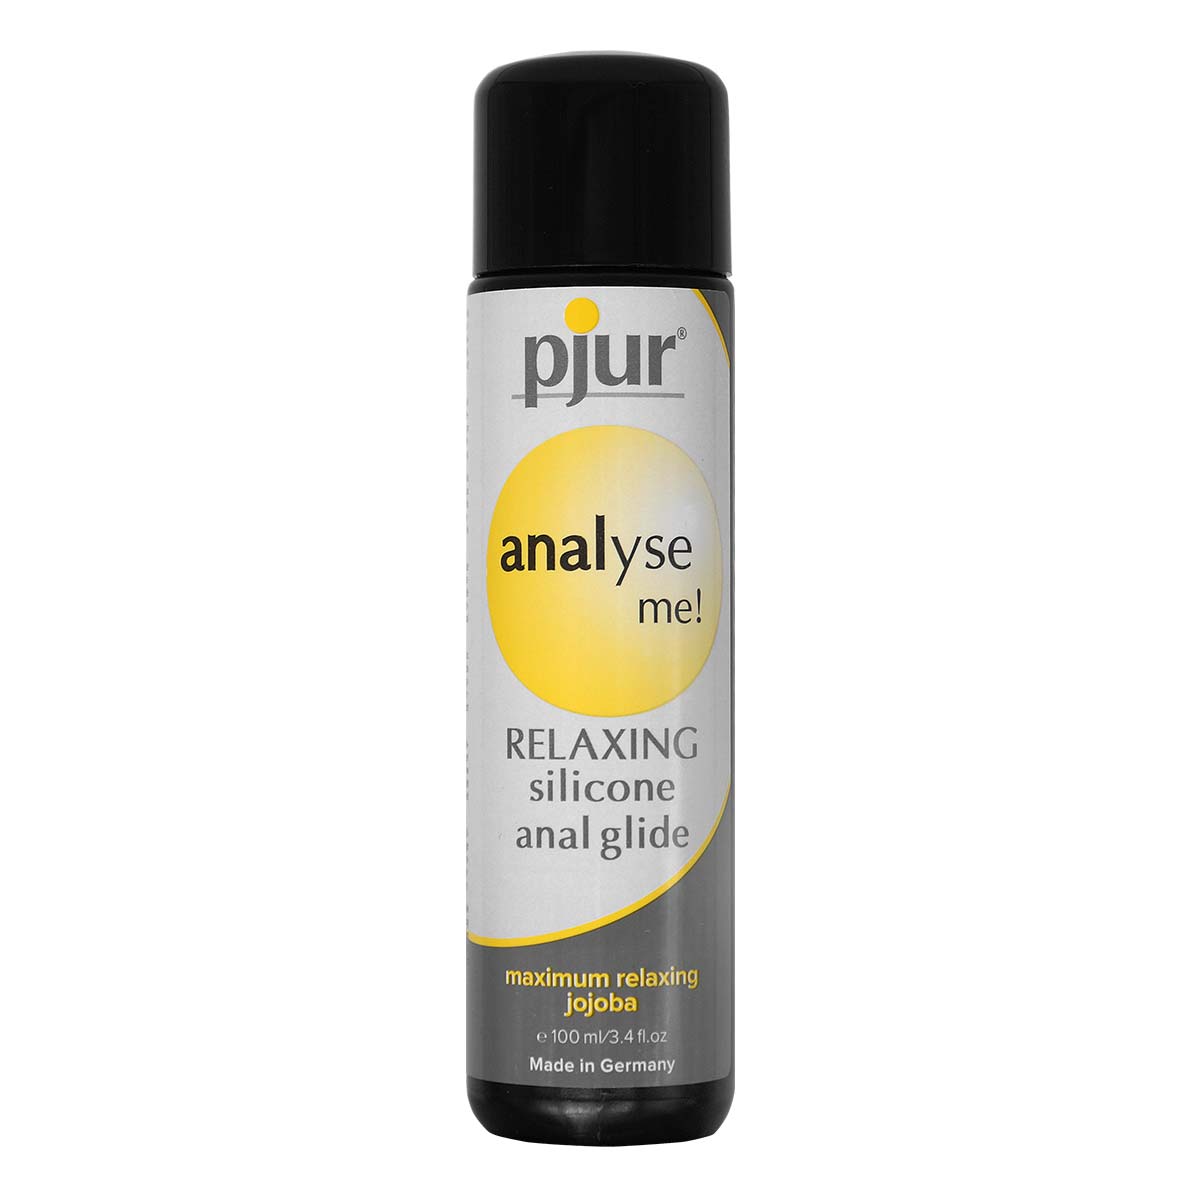 pjur analyse me! RELAXING Silicone Anal Glide 100ml Silicone-based Lubricant-p_2